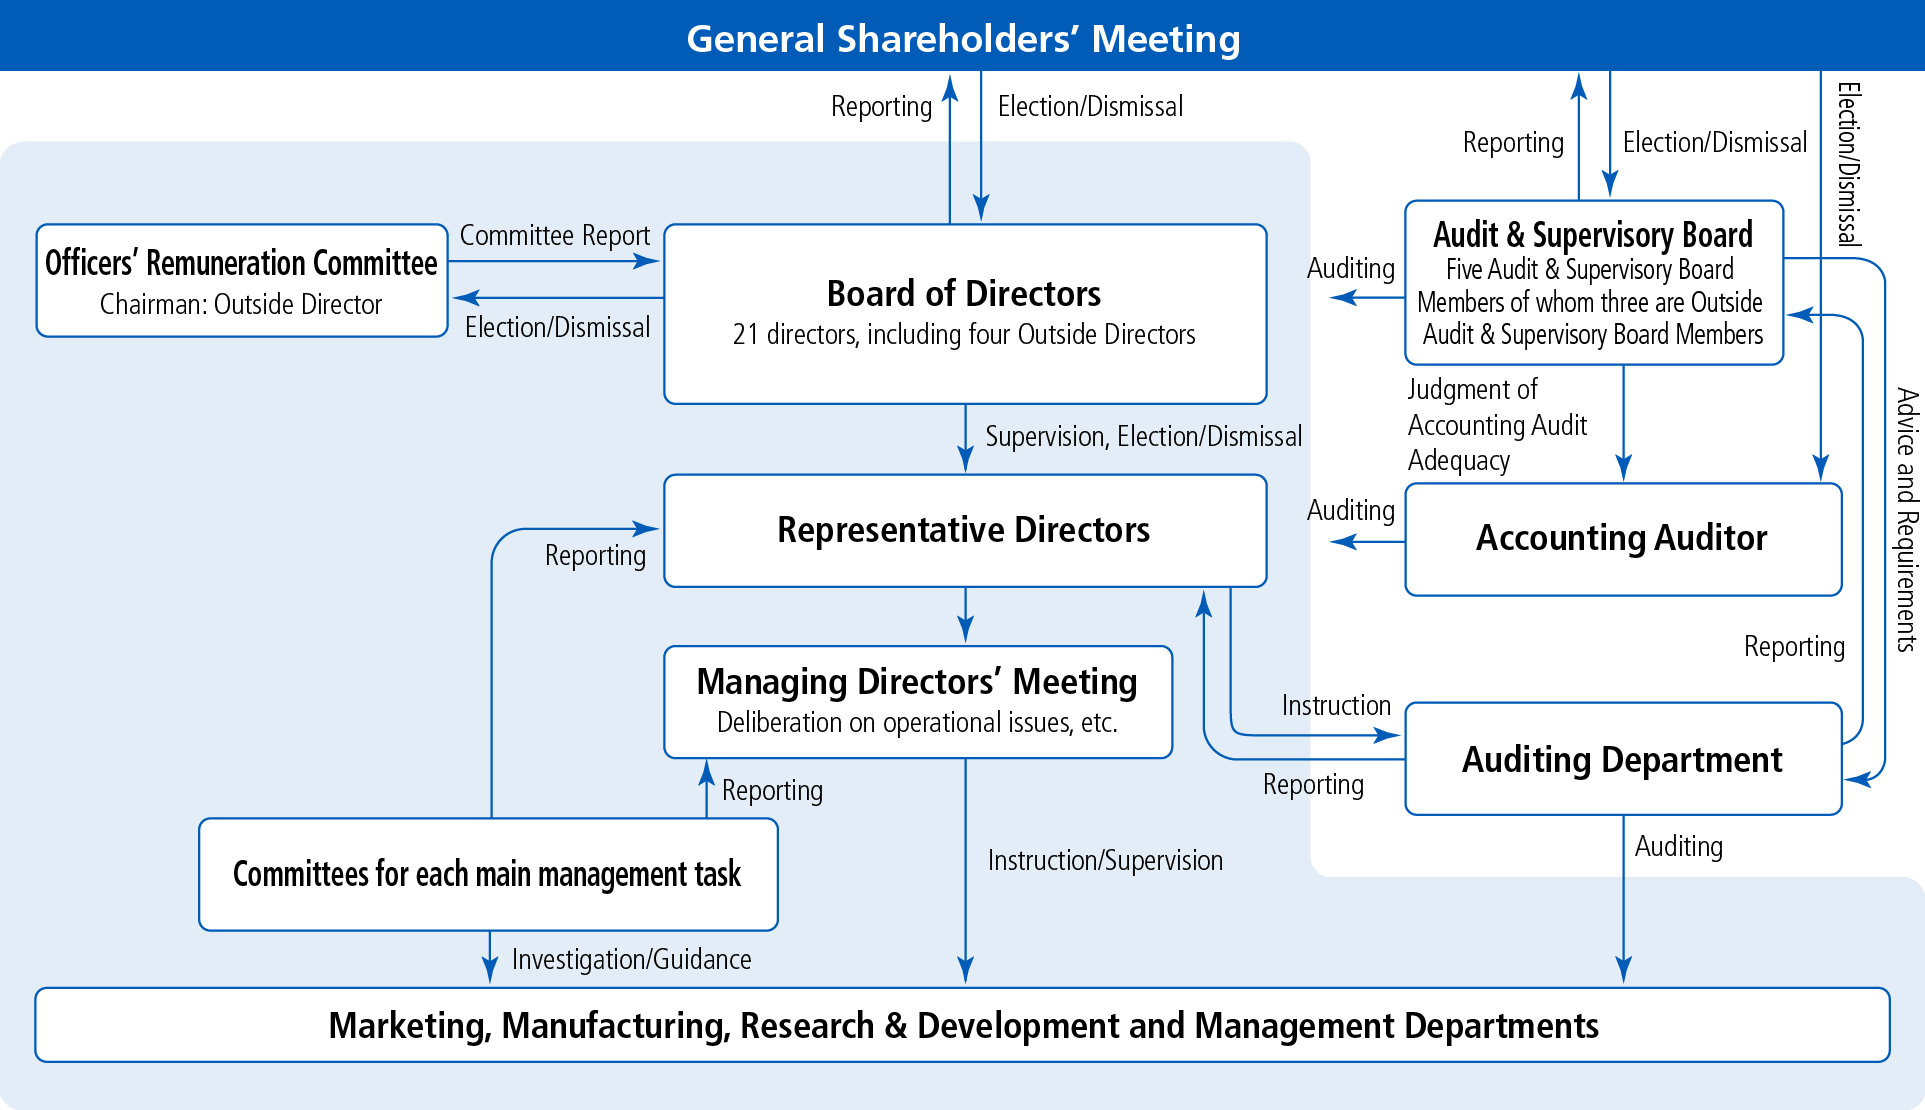 Corporate Governance System at Shin-Etsu Chemical